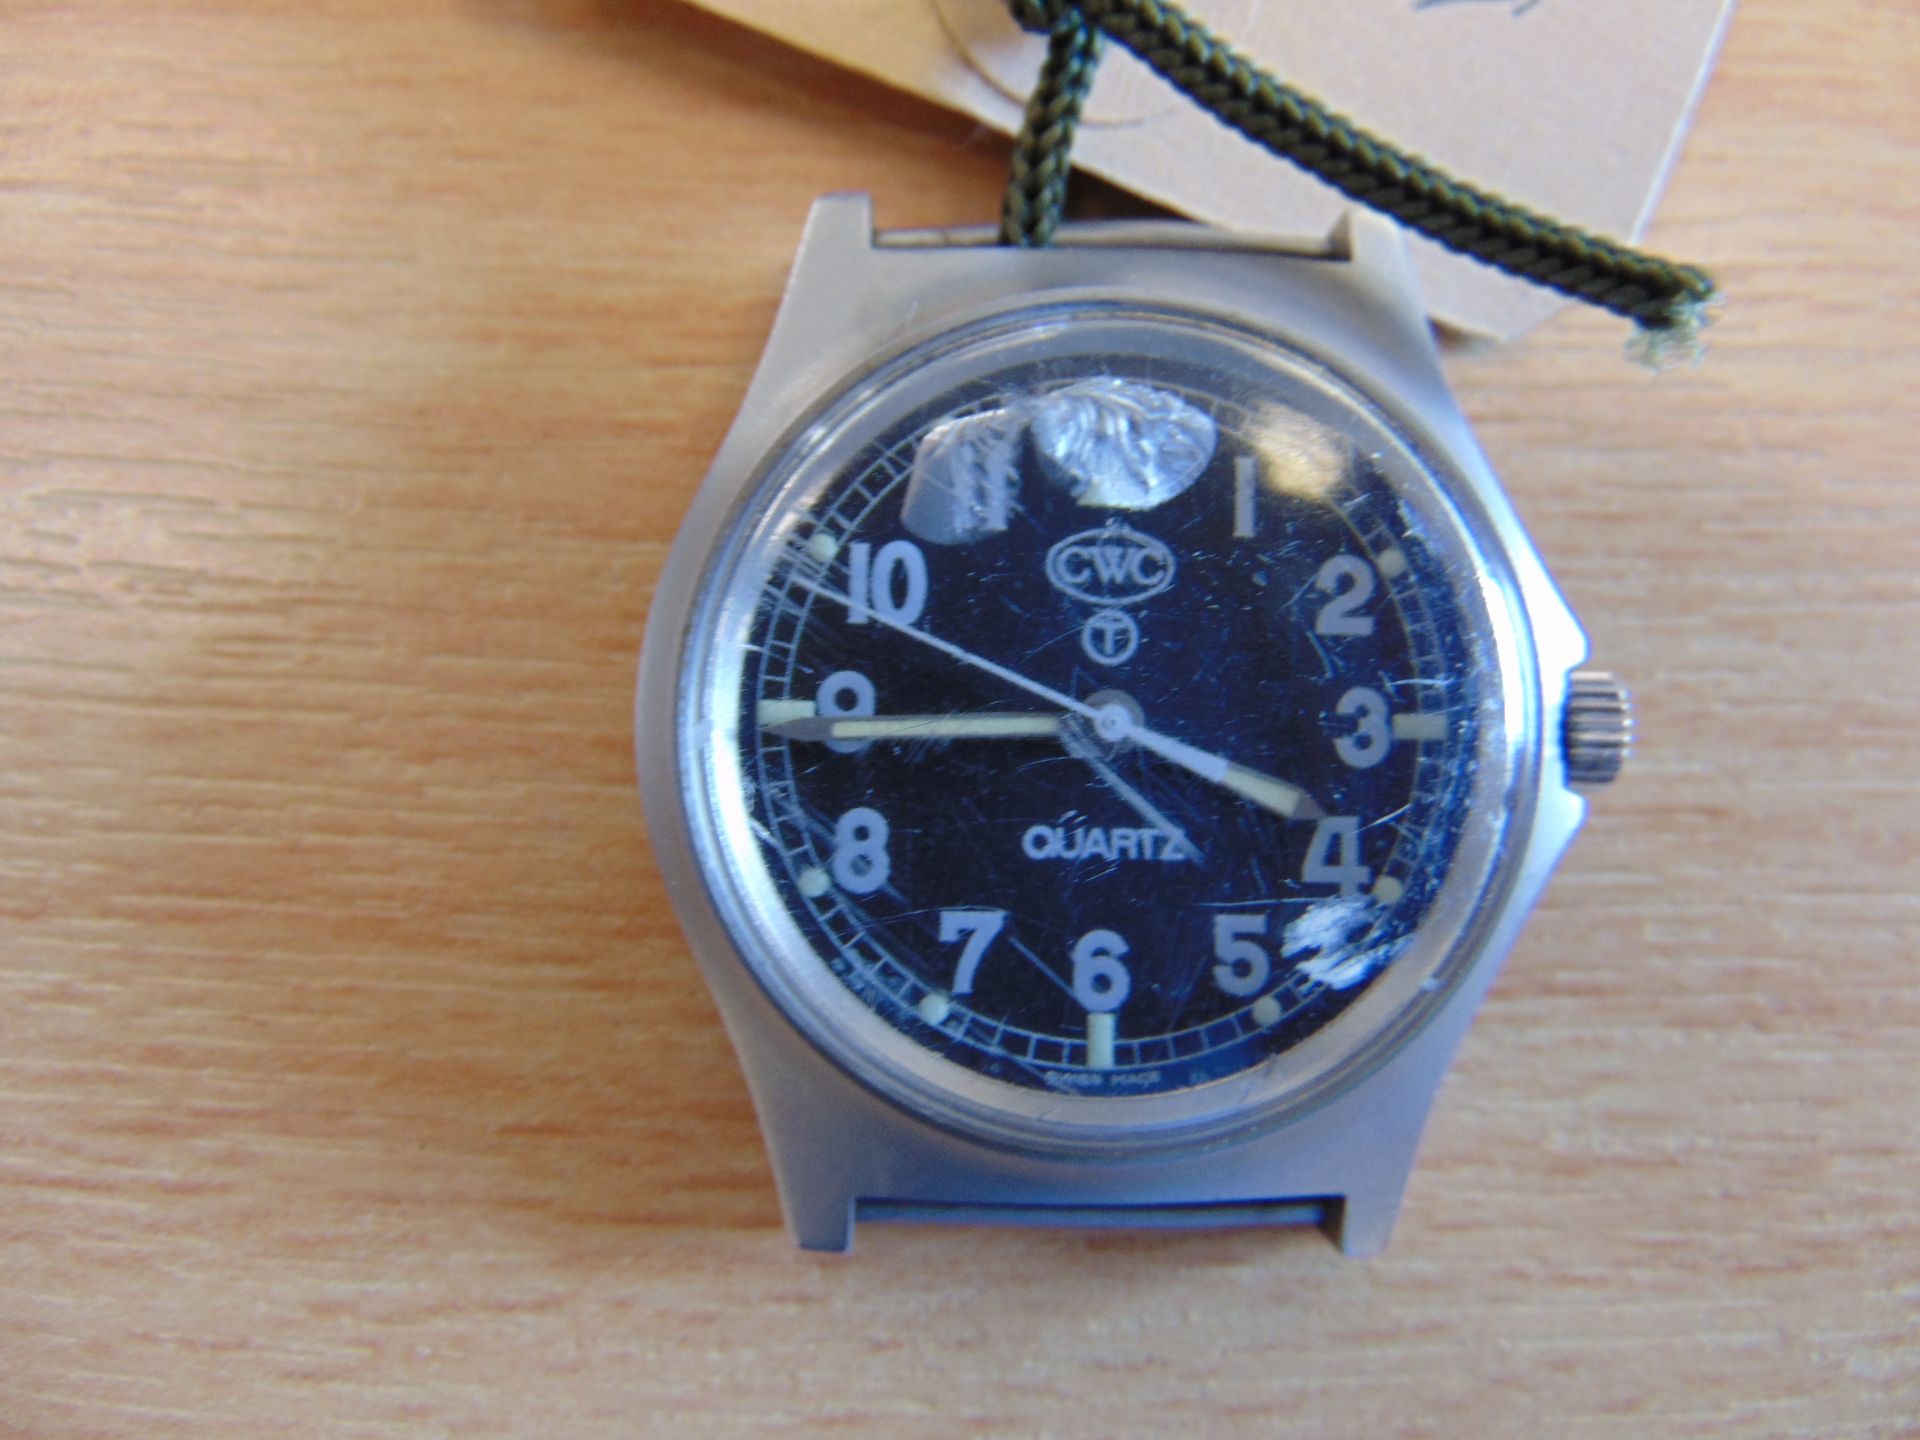 Rare CWC 0552 Royal Marines Issue Service Watch, Nato Markings, Date 1990, GULF WAR 1 - Image 2 of 5